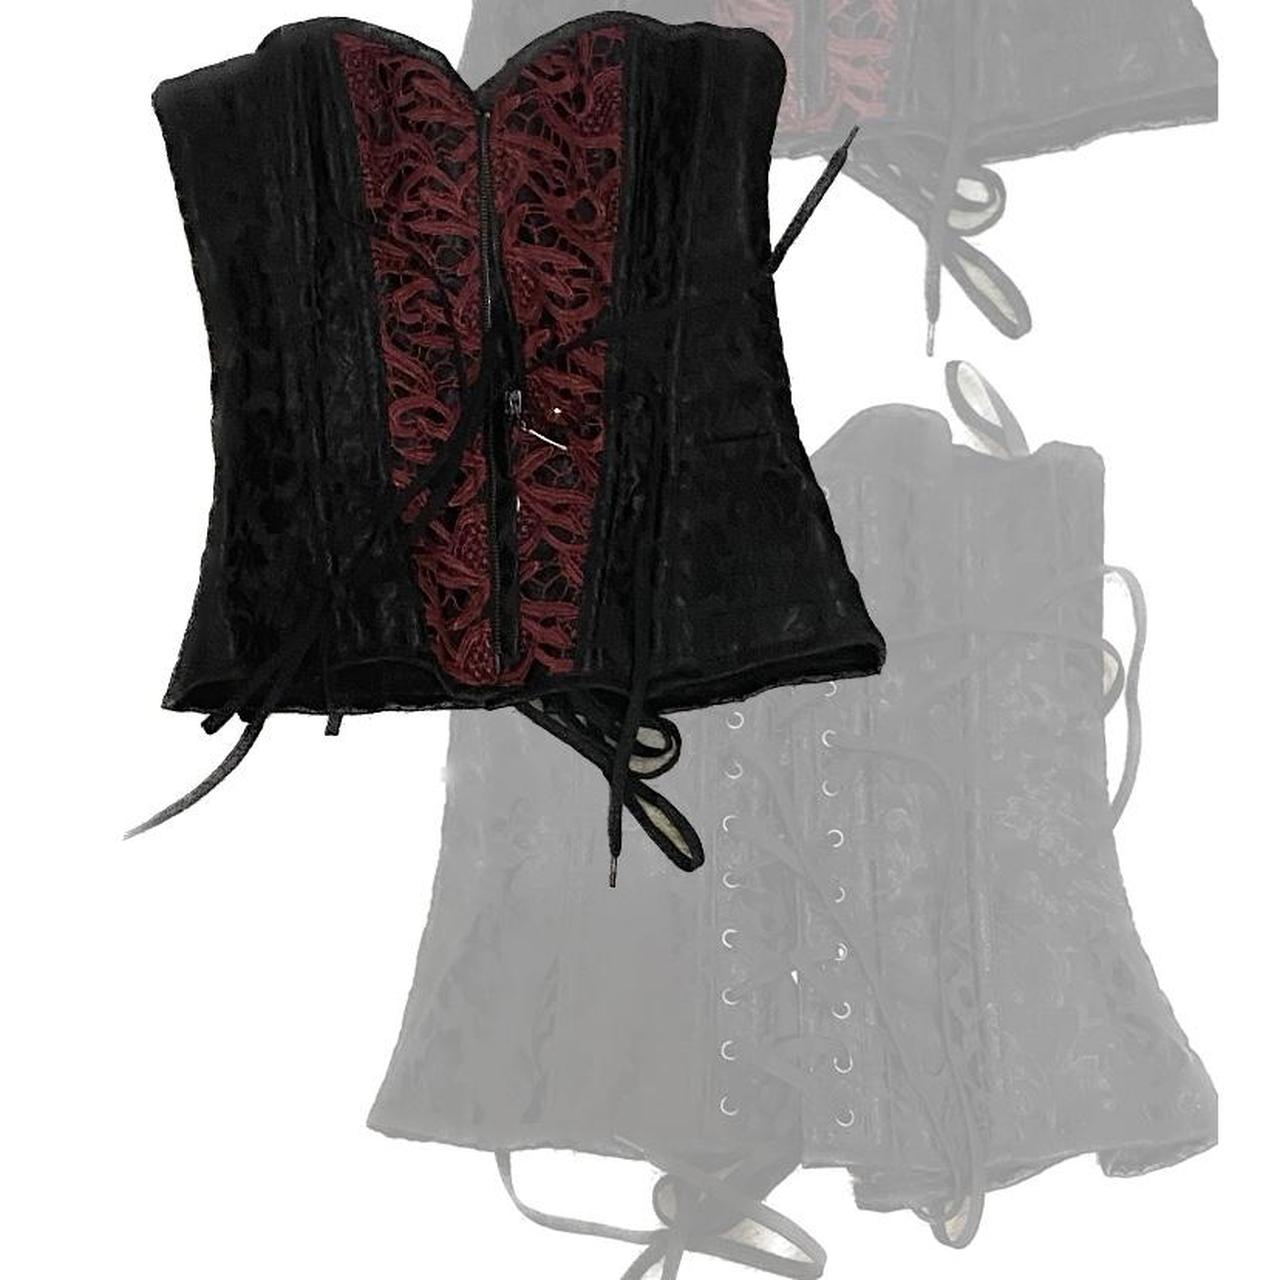 Adult vampire lace corset , -, -, -, very cute not